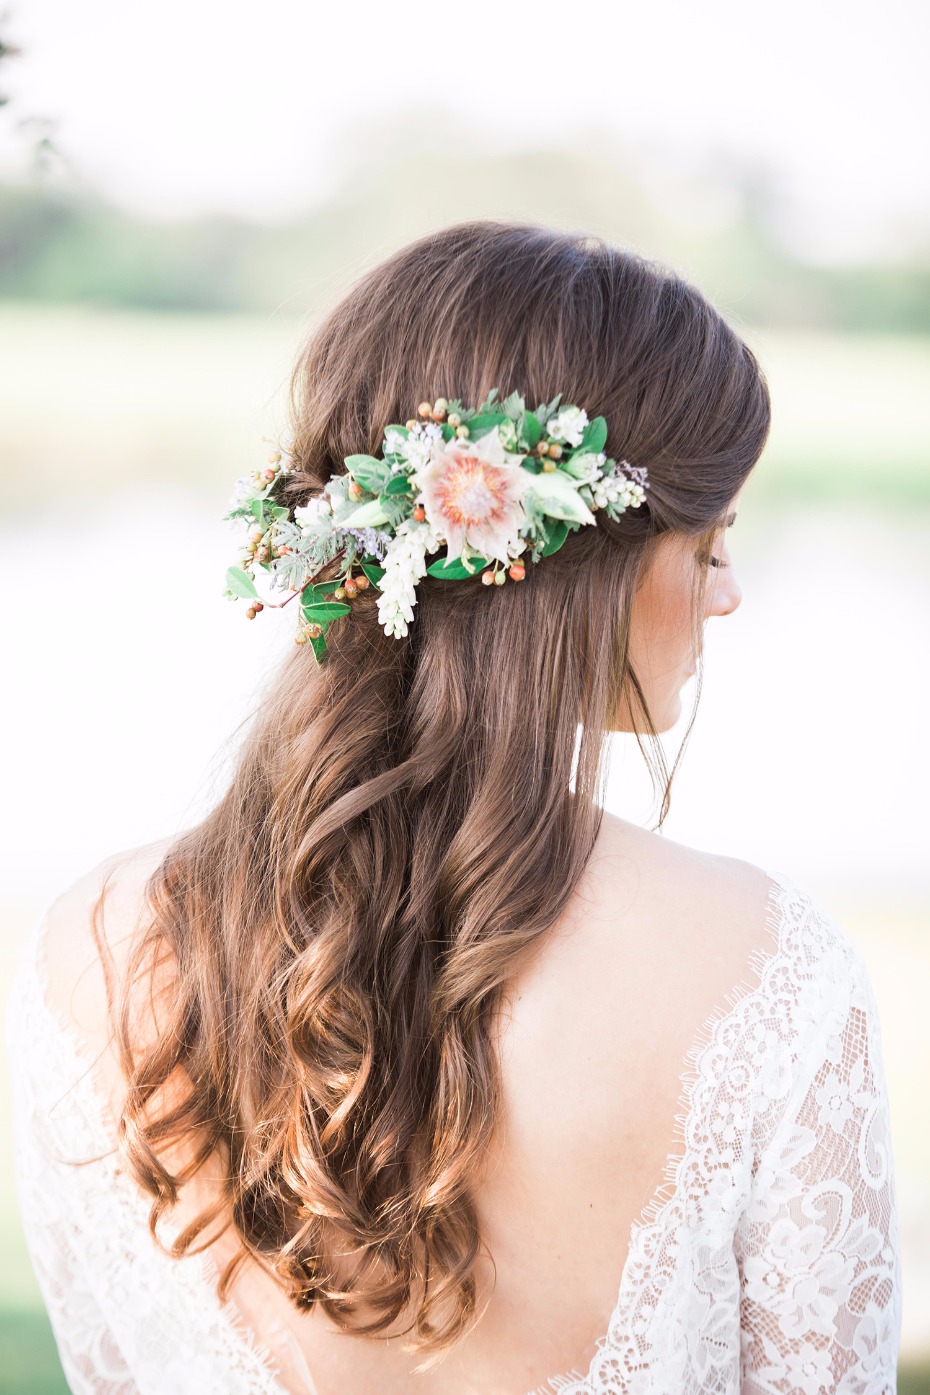 Perfect wedding hair with florals accessory